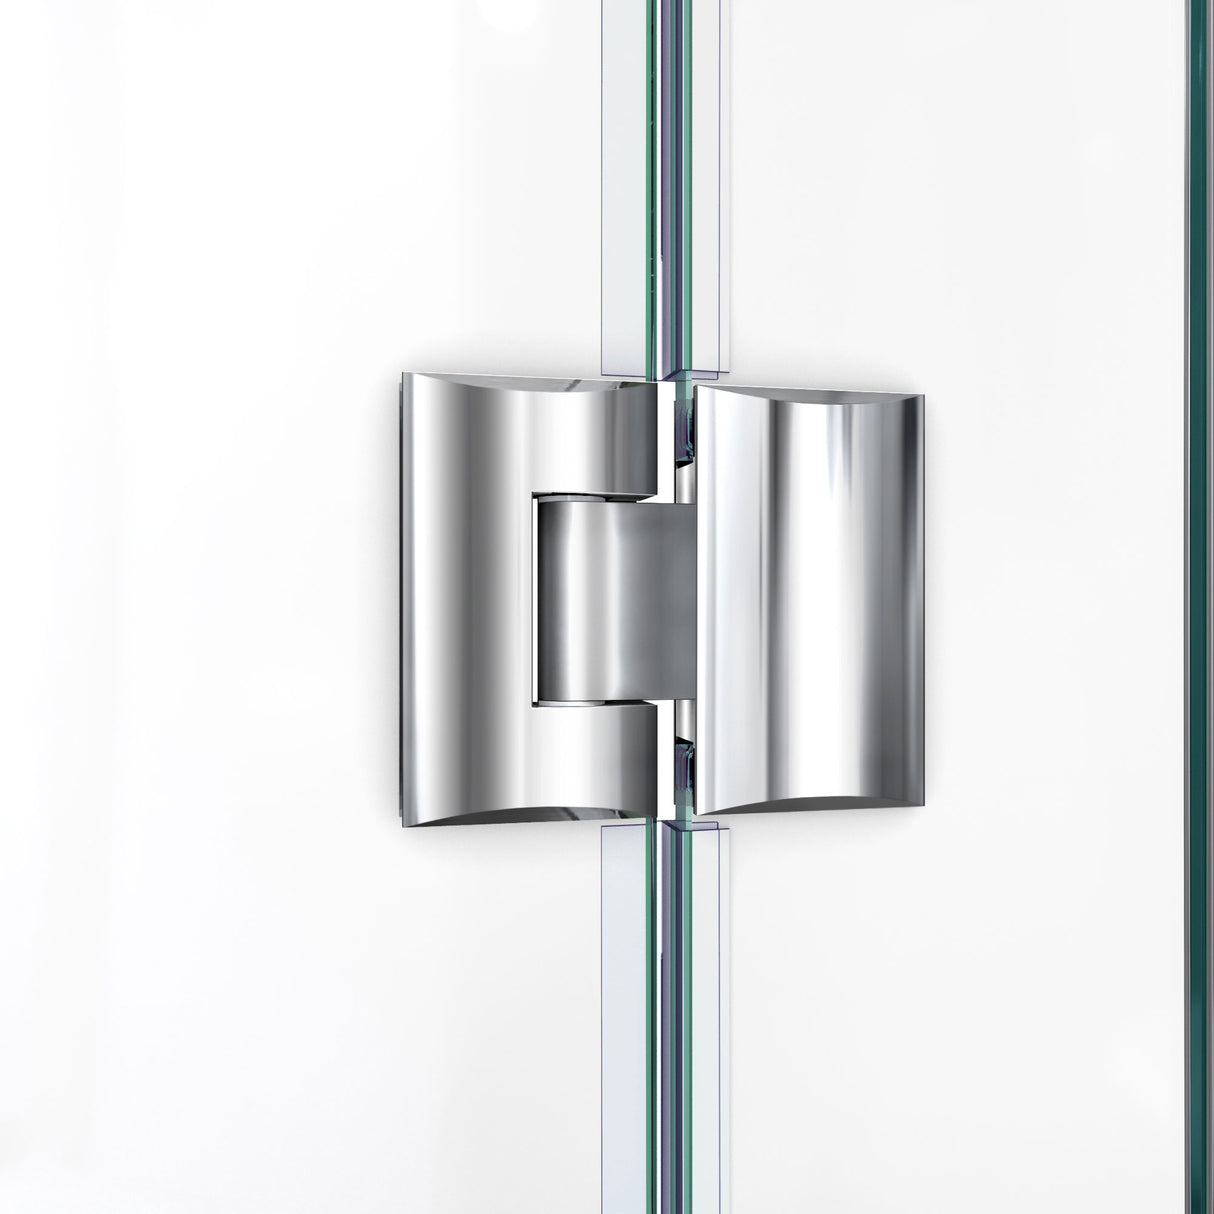 DreamLine Prism Plus 40 in. x 72 in. Frameless Neo-Angle Hinged Shower Enclosure in Chrome